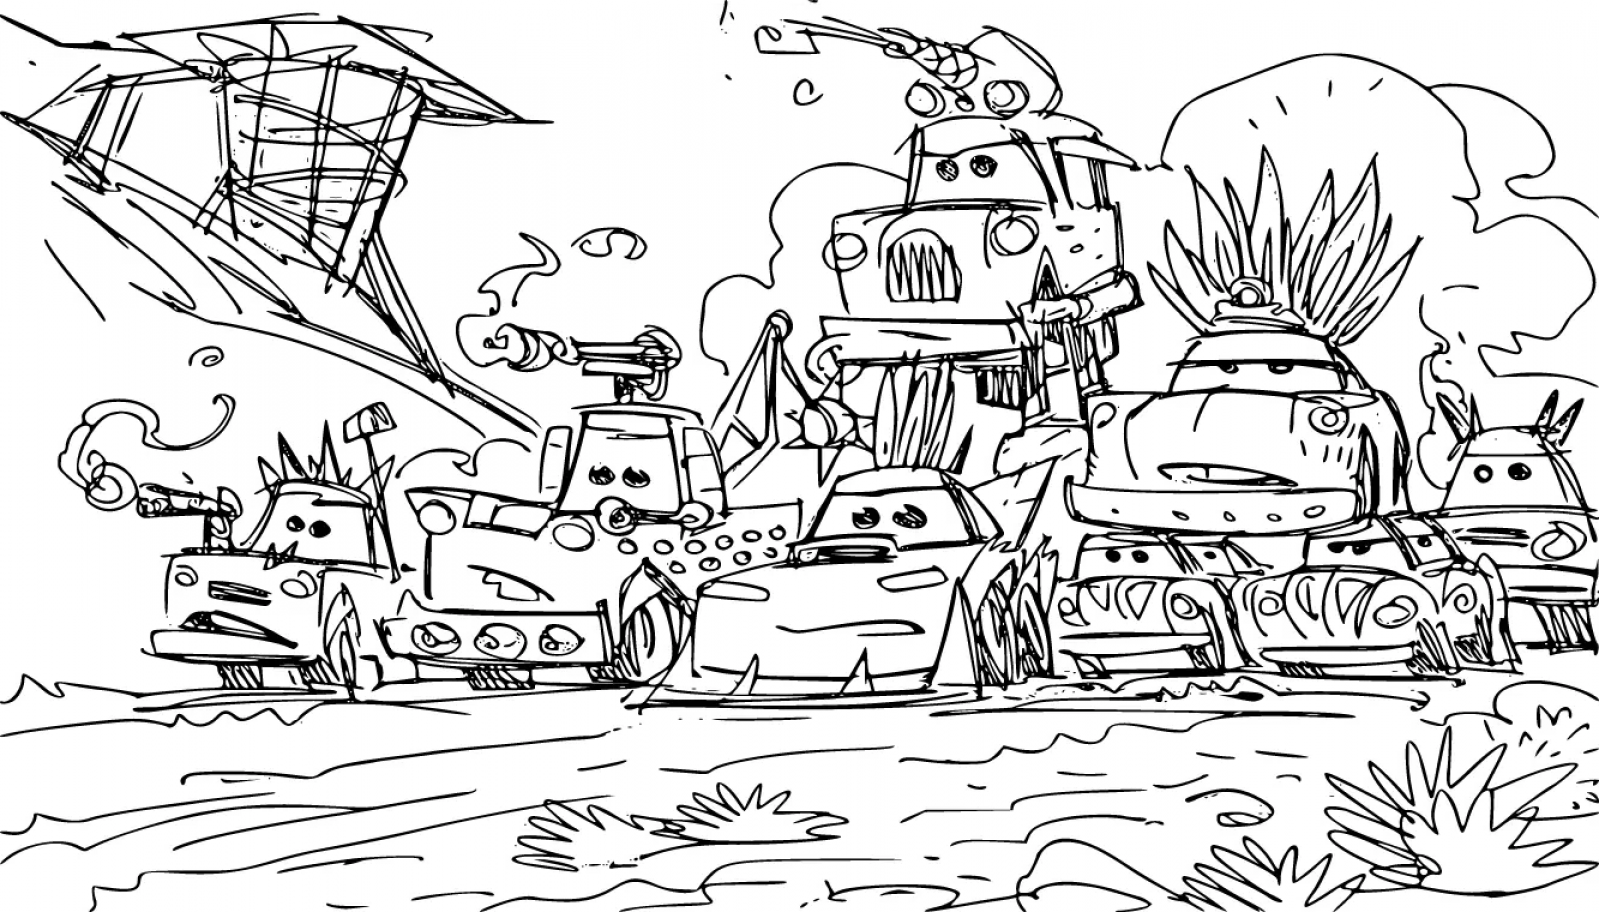 Cars on the Road Art Work Coloring Page Black White - SheetalColor.com